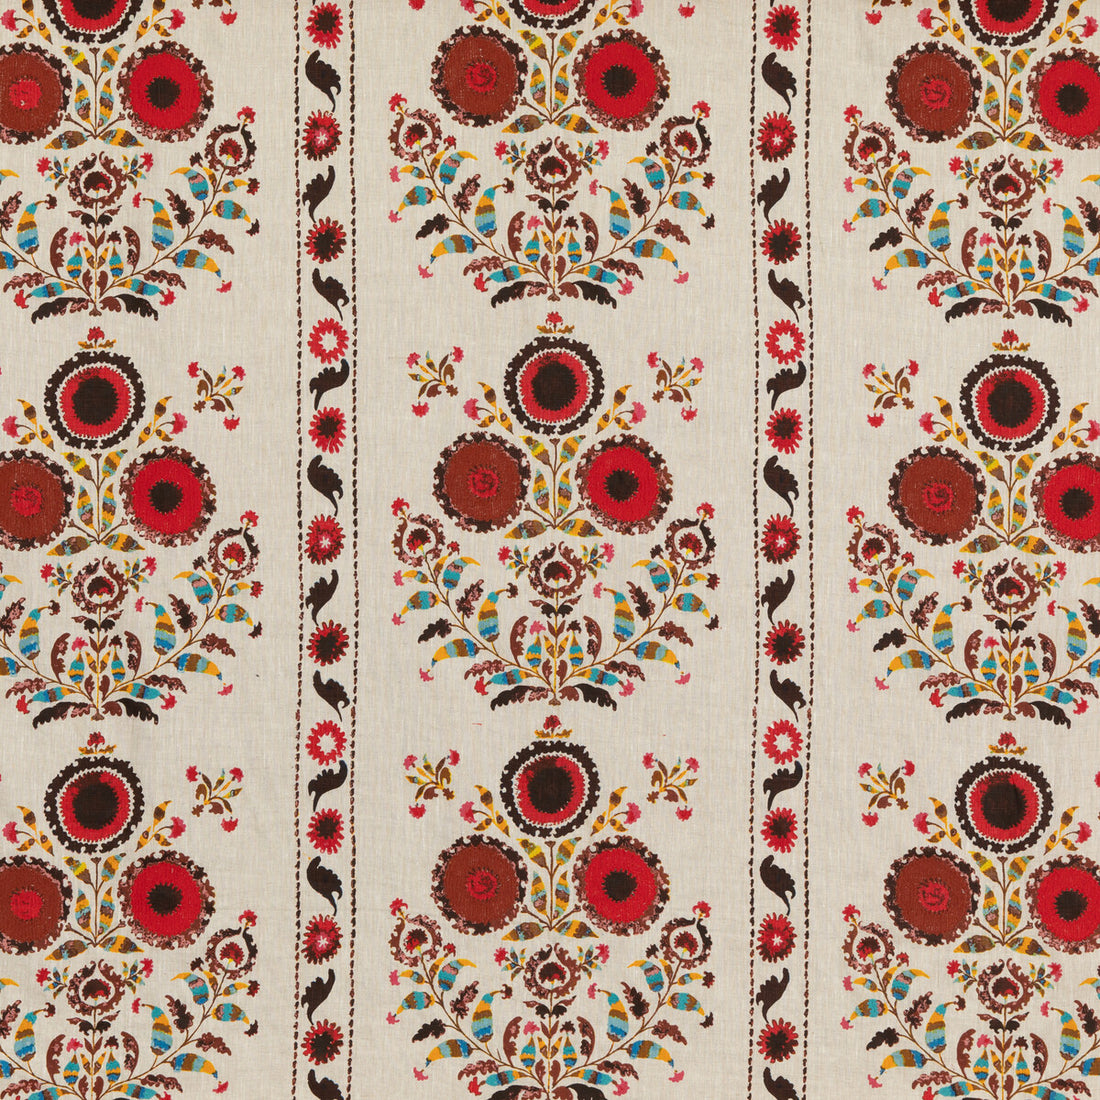 Petersham fabric in spice color - pattern FD310.T30.0 - by Mulberry in the Modern Country I collection